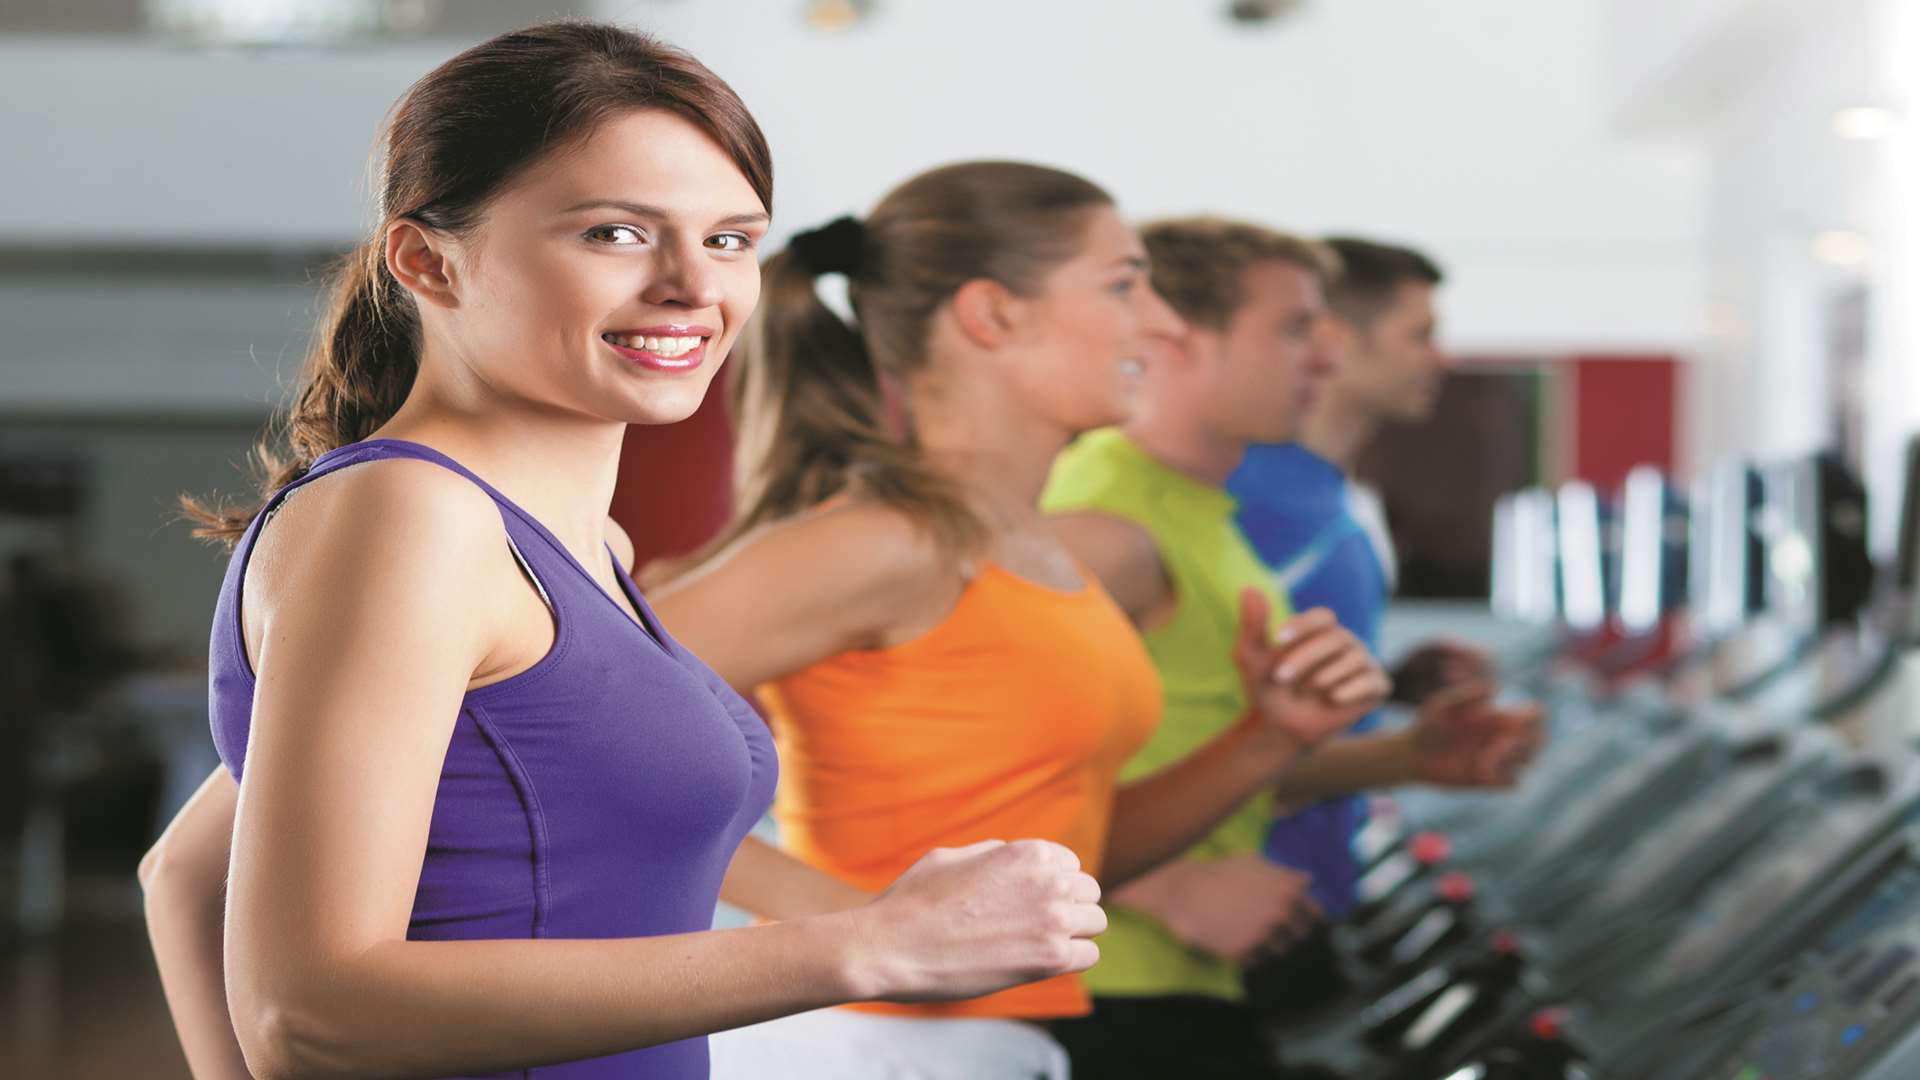 People in a gym on treadmill. Stock image